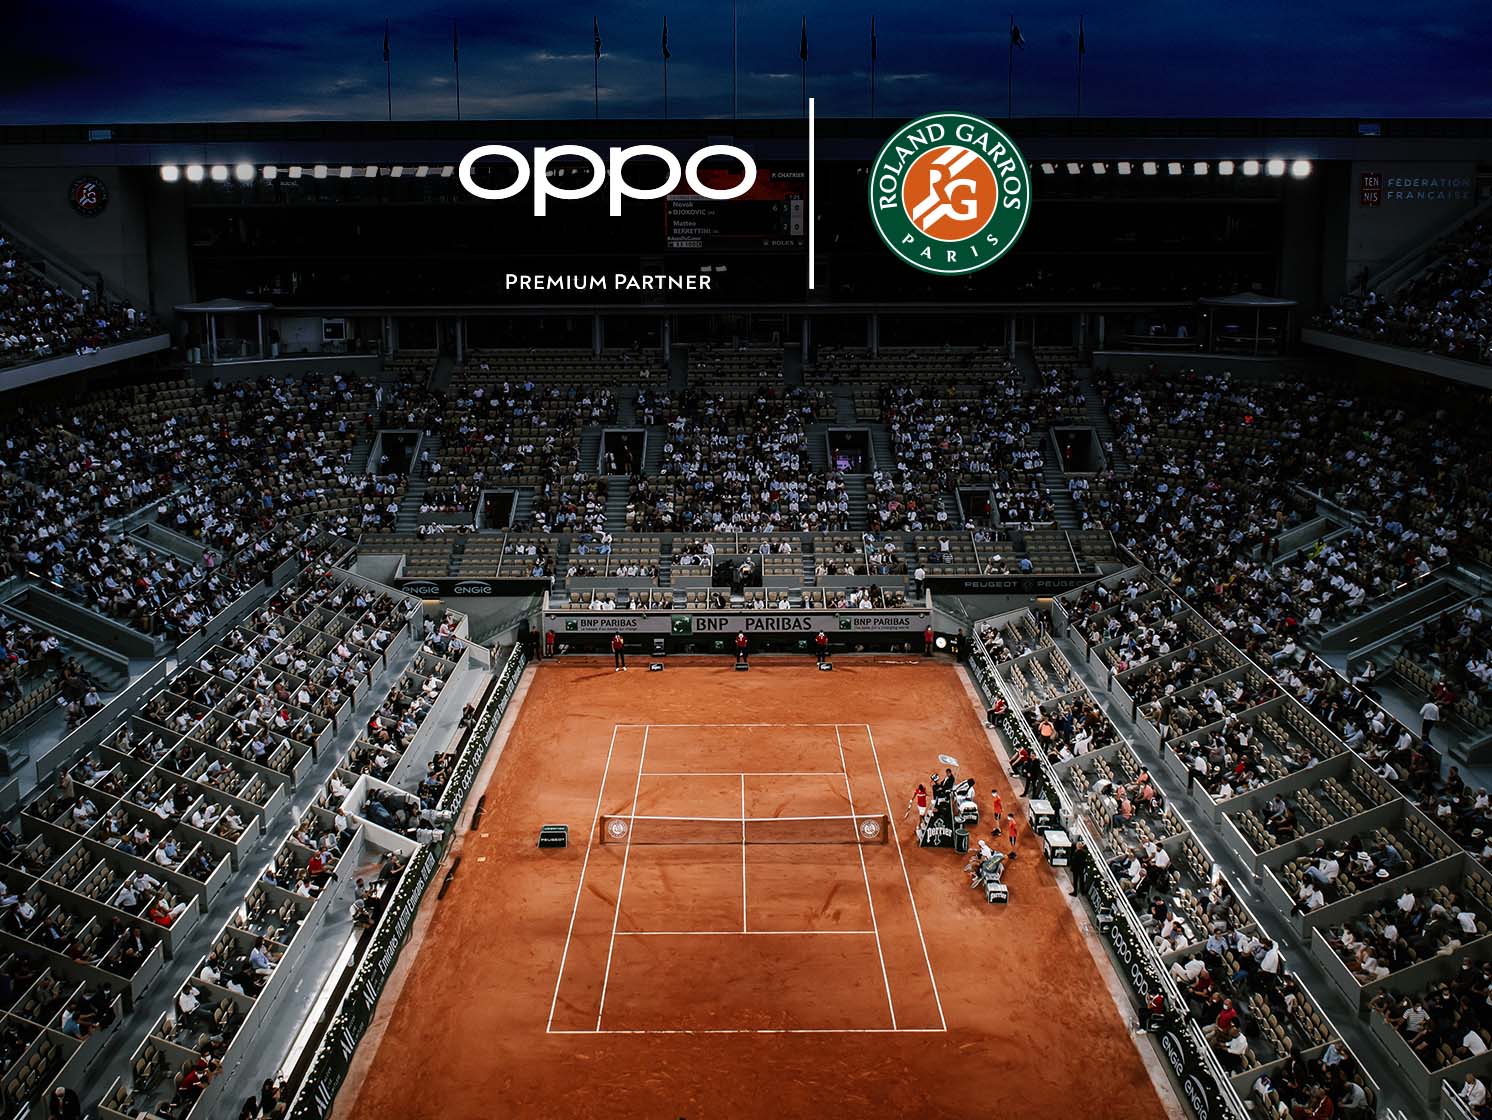 Roland-Garros and OPPO proudly announce extended premium partnership for  2022 and 2023 tournaments